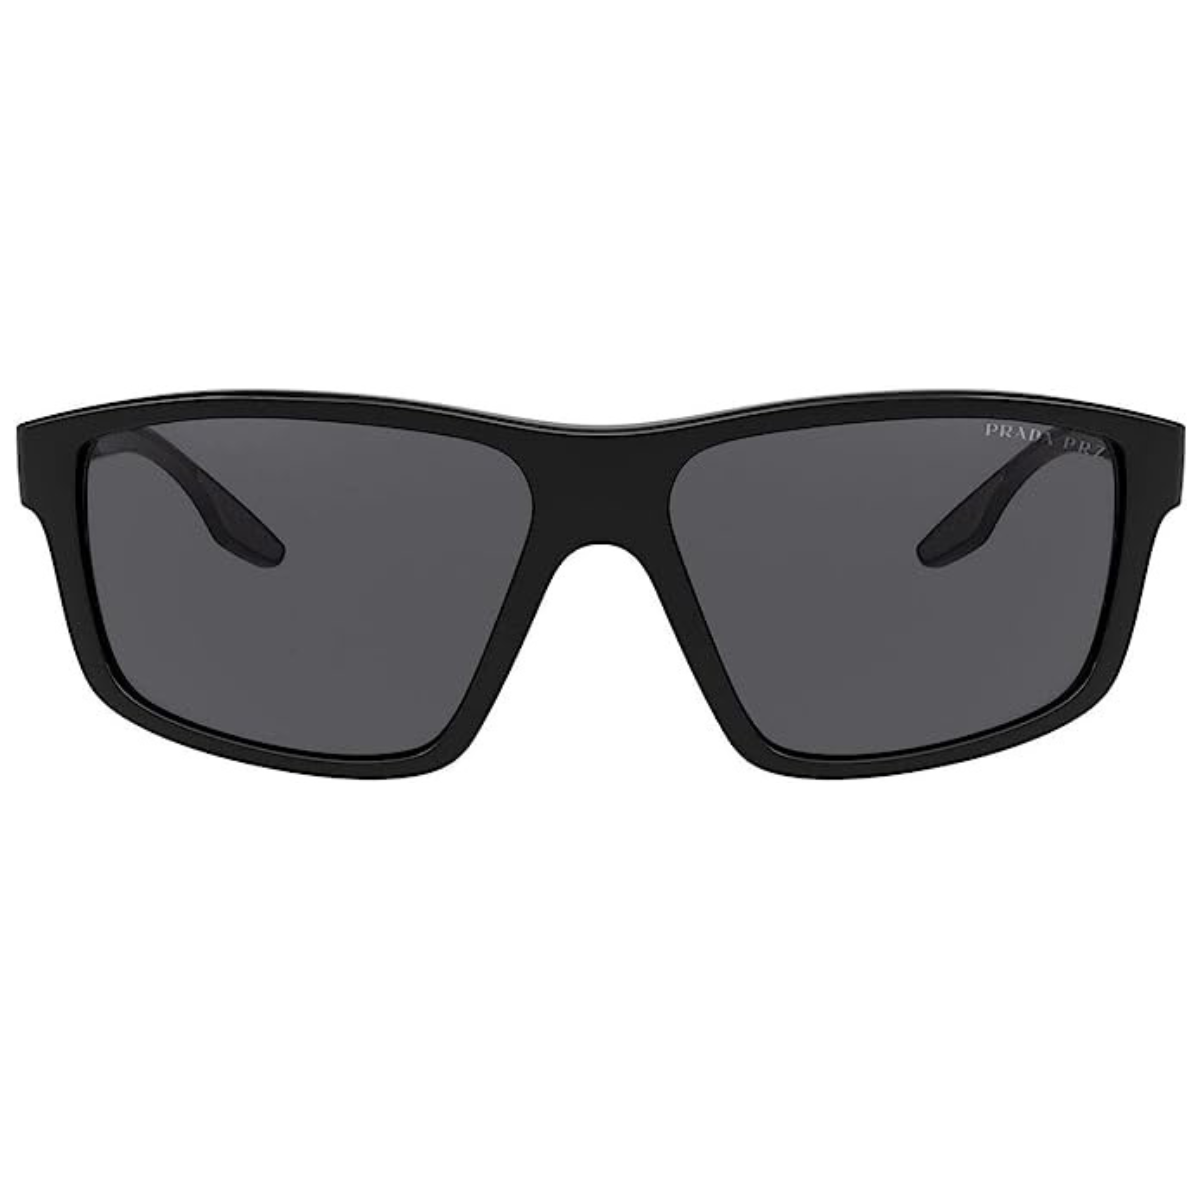 "Elevate your style with Prada SPS 02XS - DG002G sunglasses for men, featuring dark grey polarized lenses at Optorium."